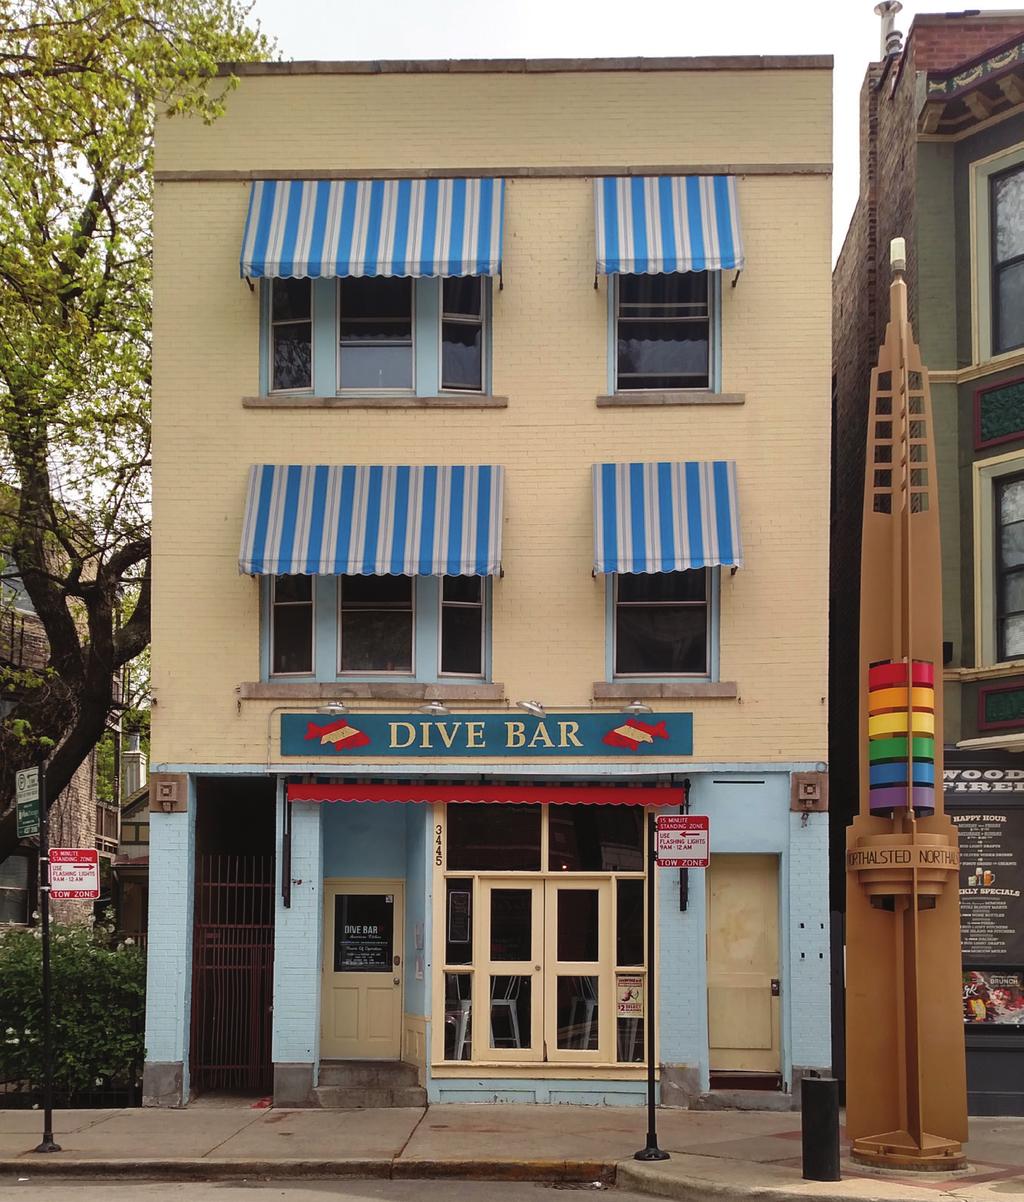 FOR SALE BY OWNER, BROKER PROTECTED Lakeview - Chicago RESTAURANT BUSINESS WITH REAL ESTATE AND APARTMENTS. RESTAURANT IS TURNKEY WITH FURNISHED OUTDOOR PATIO. 3445 N. Halsted St.